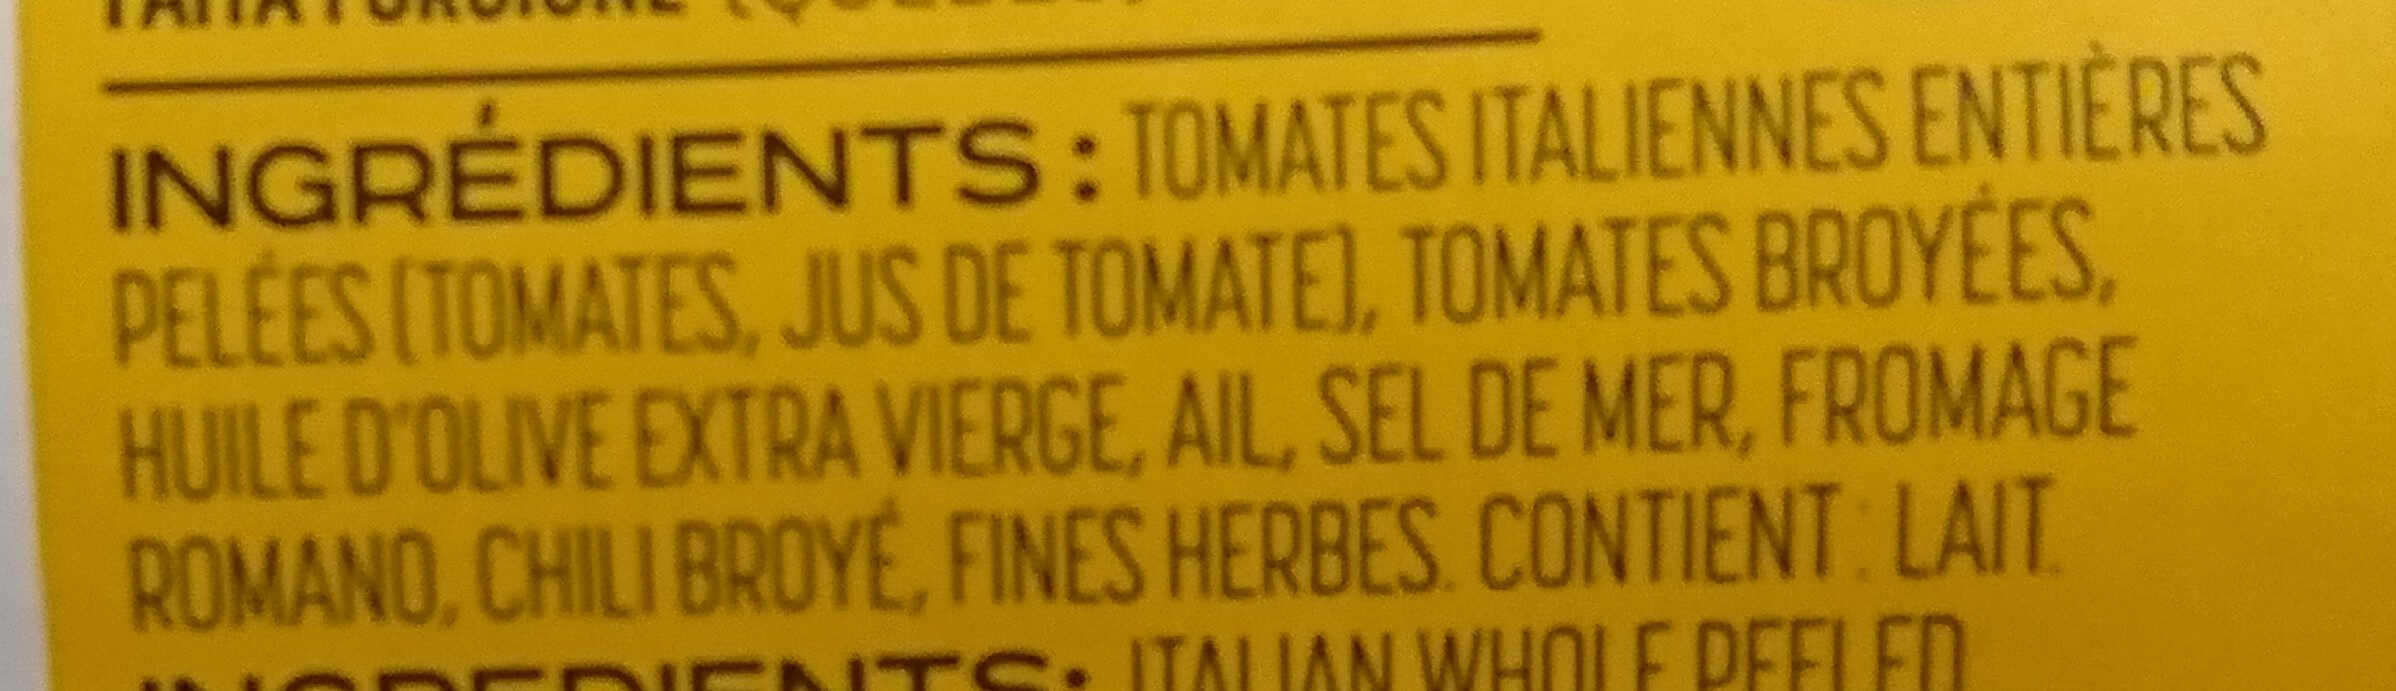 Pizza sauce tomate - Ingredients - fr